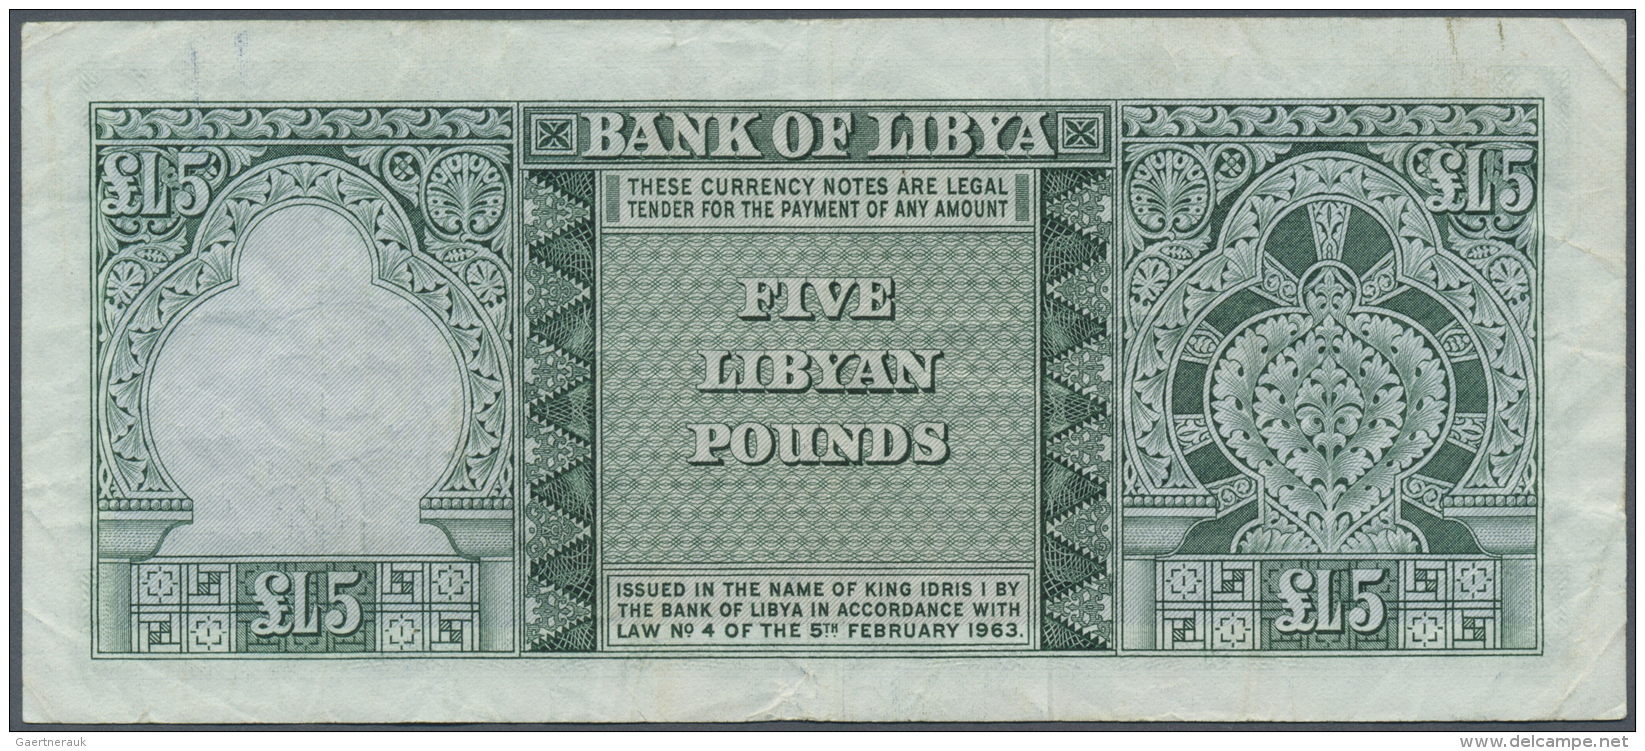 Libya / Libyen: 5 Pounds L.1963 P. 31, Used With Folds And Creases, No Holes Or Tears, Still Strong Paper And Original C - Libye